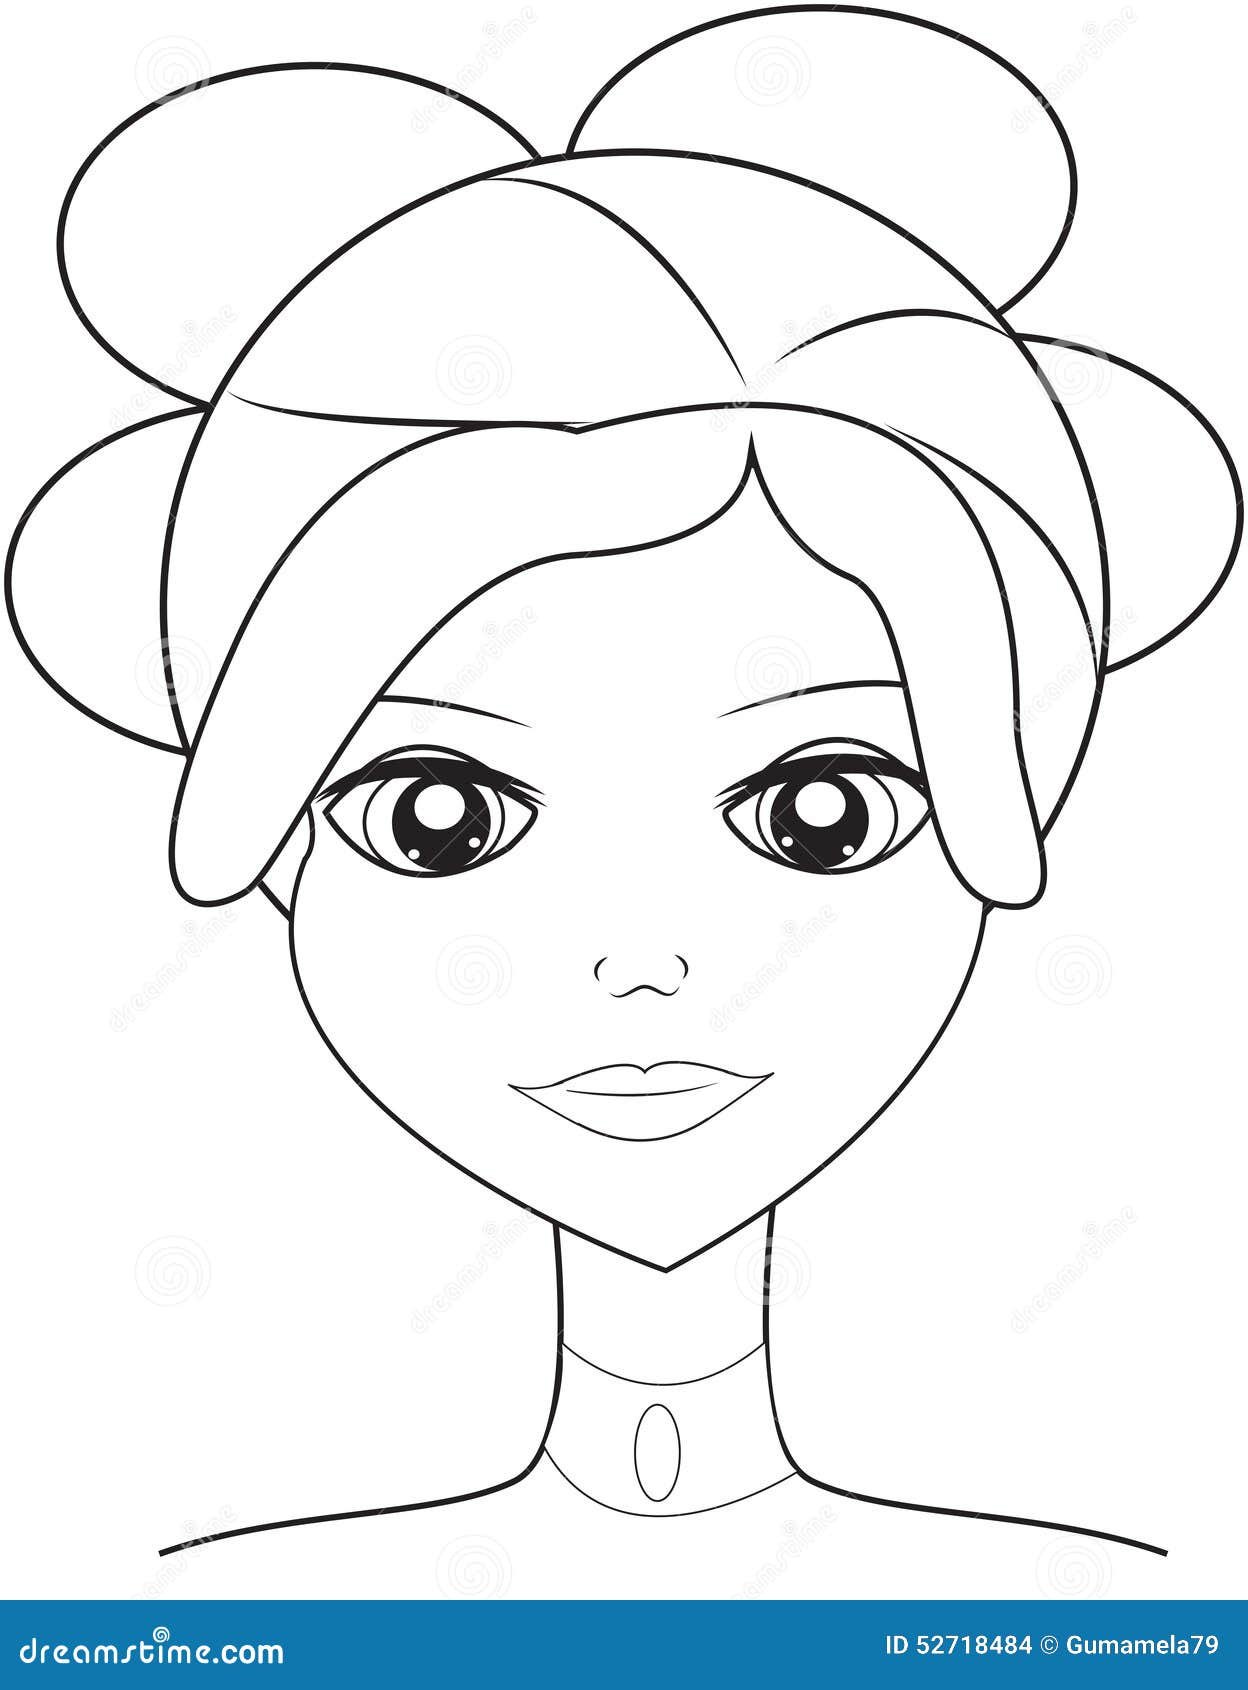 Get Face Coloring Pages